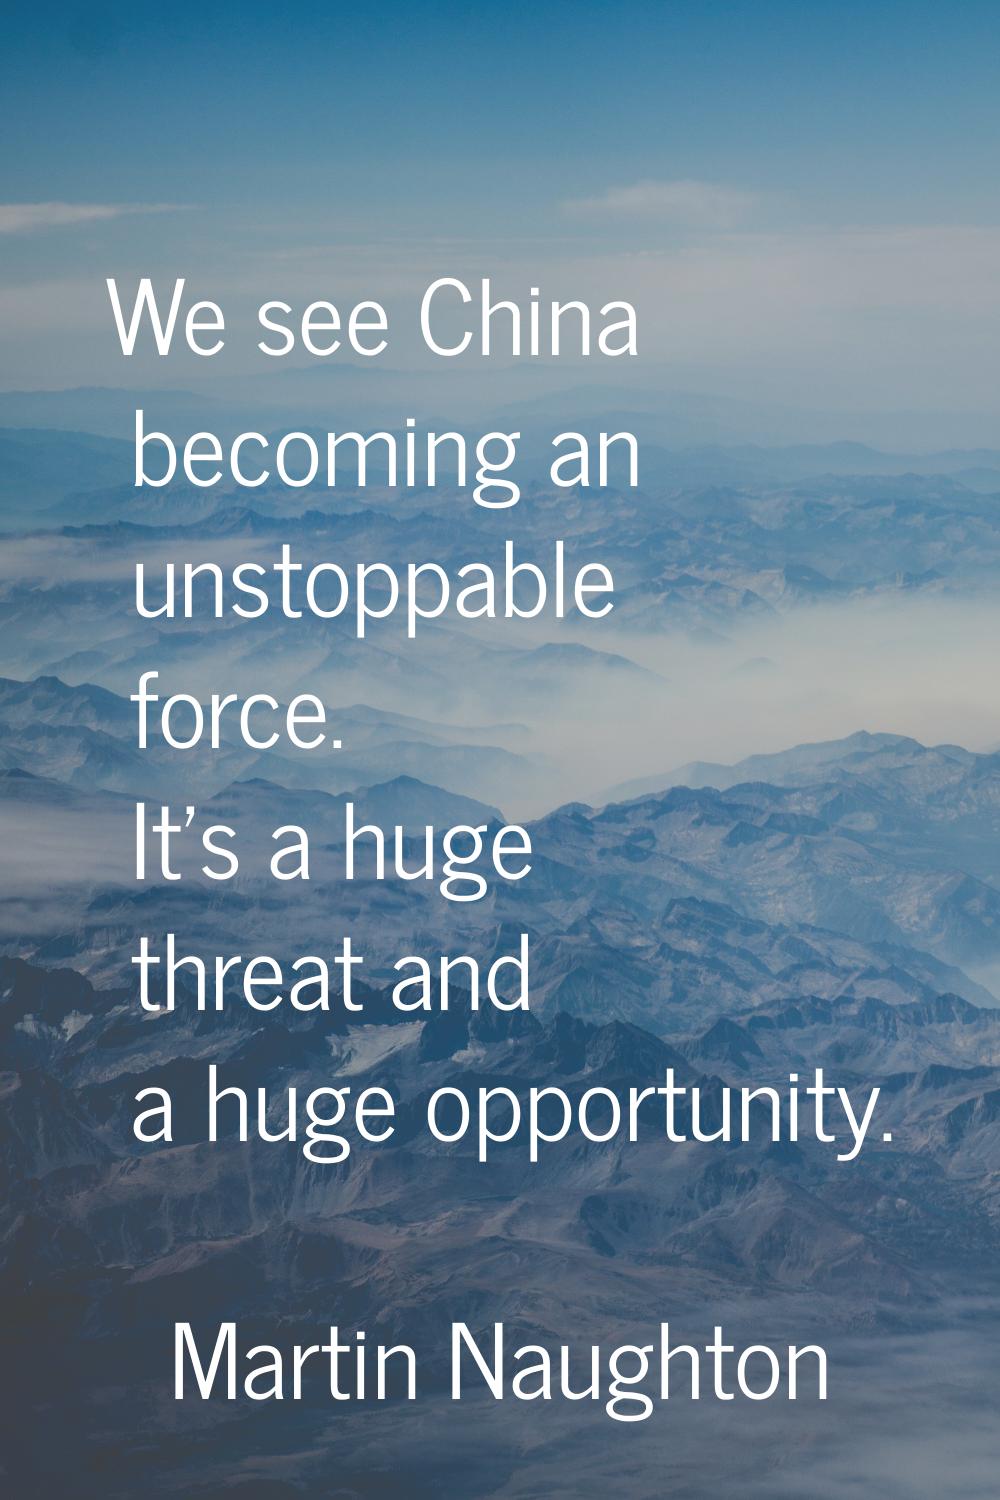 We see China becoming an unstoppable force. It's a huge threat and a huge opportunity.